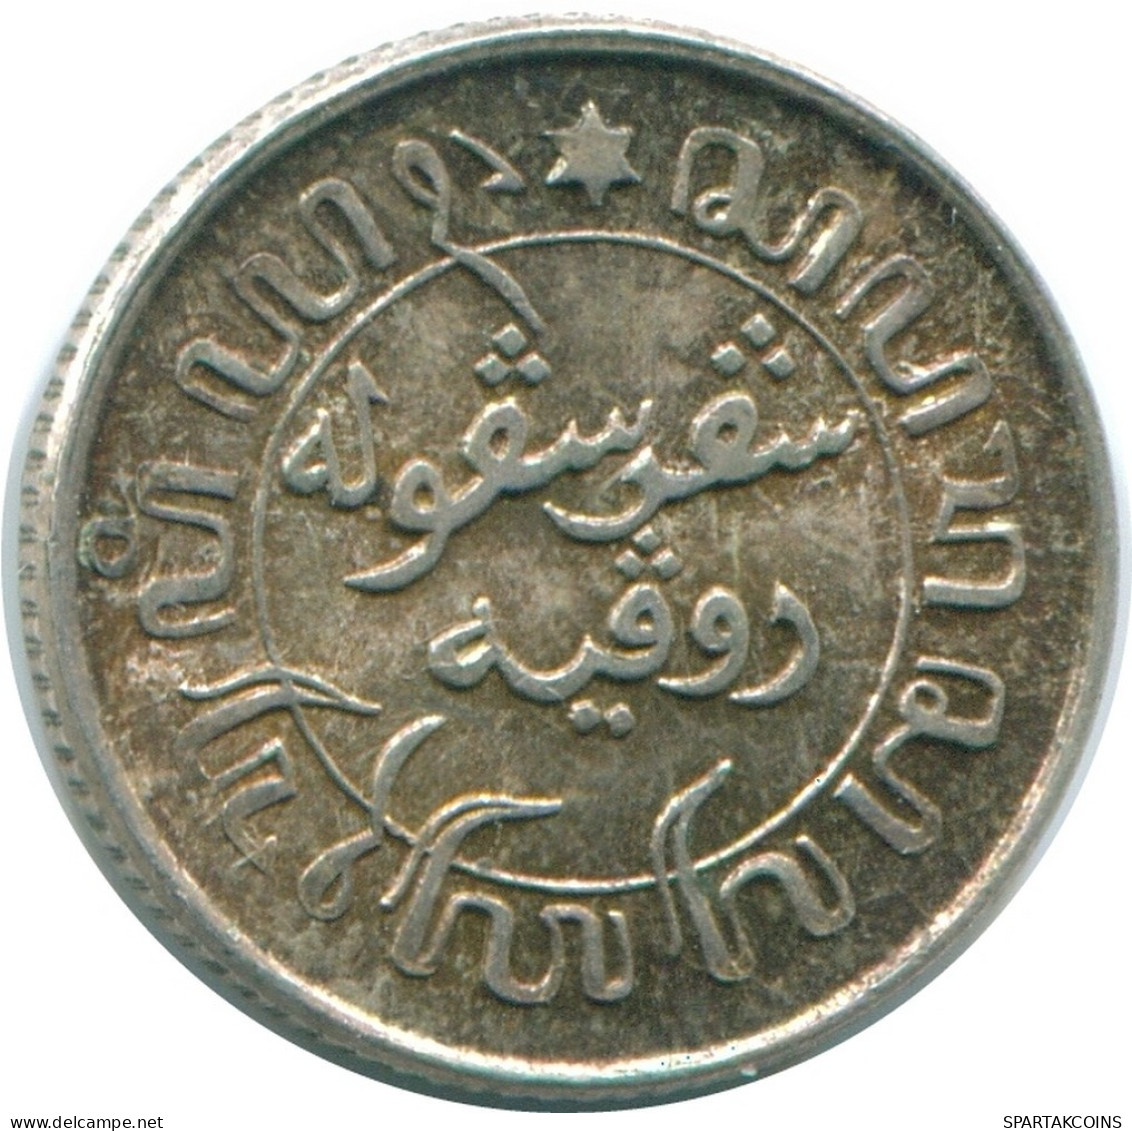 1/10 GULDEN 1945 P NETHERLANDS EAST INDIES SILVER Colonial Coin #NL14156.3.U.A - Indes Neerlandesas